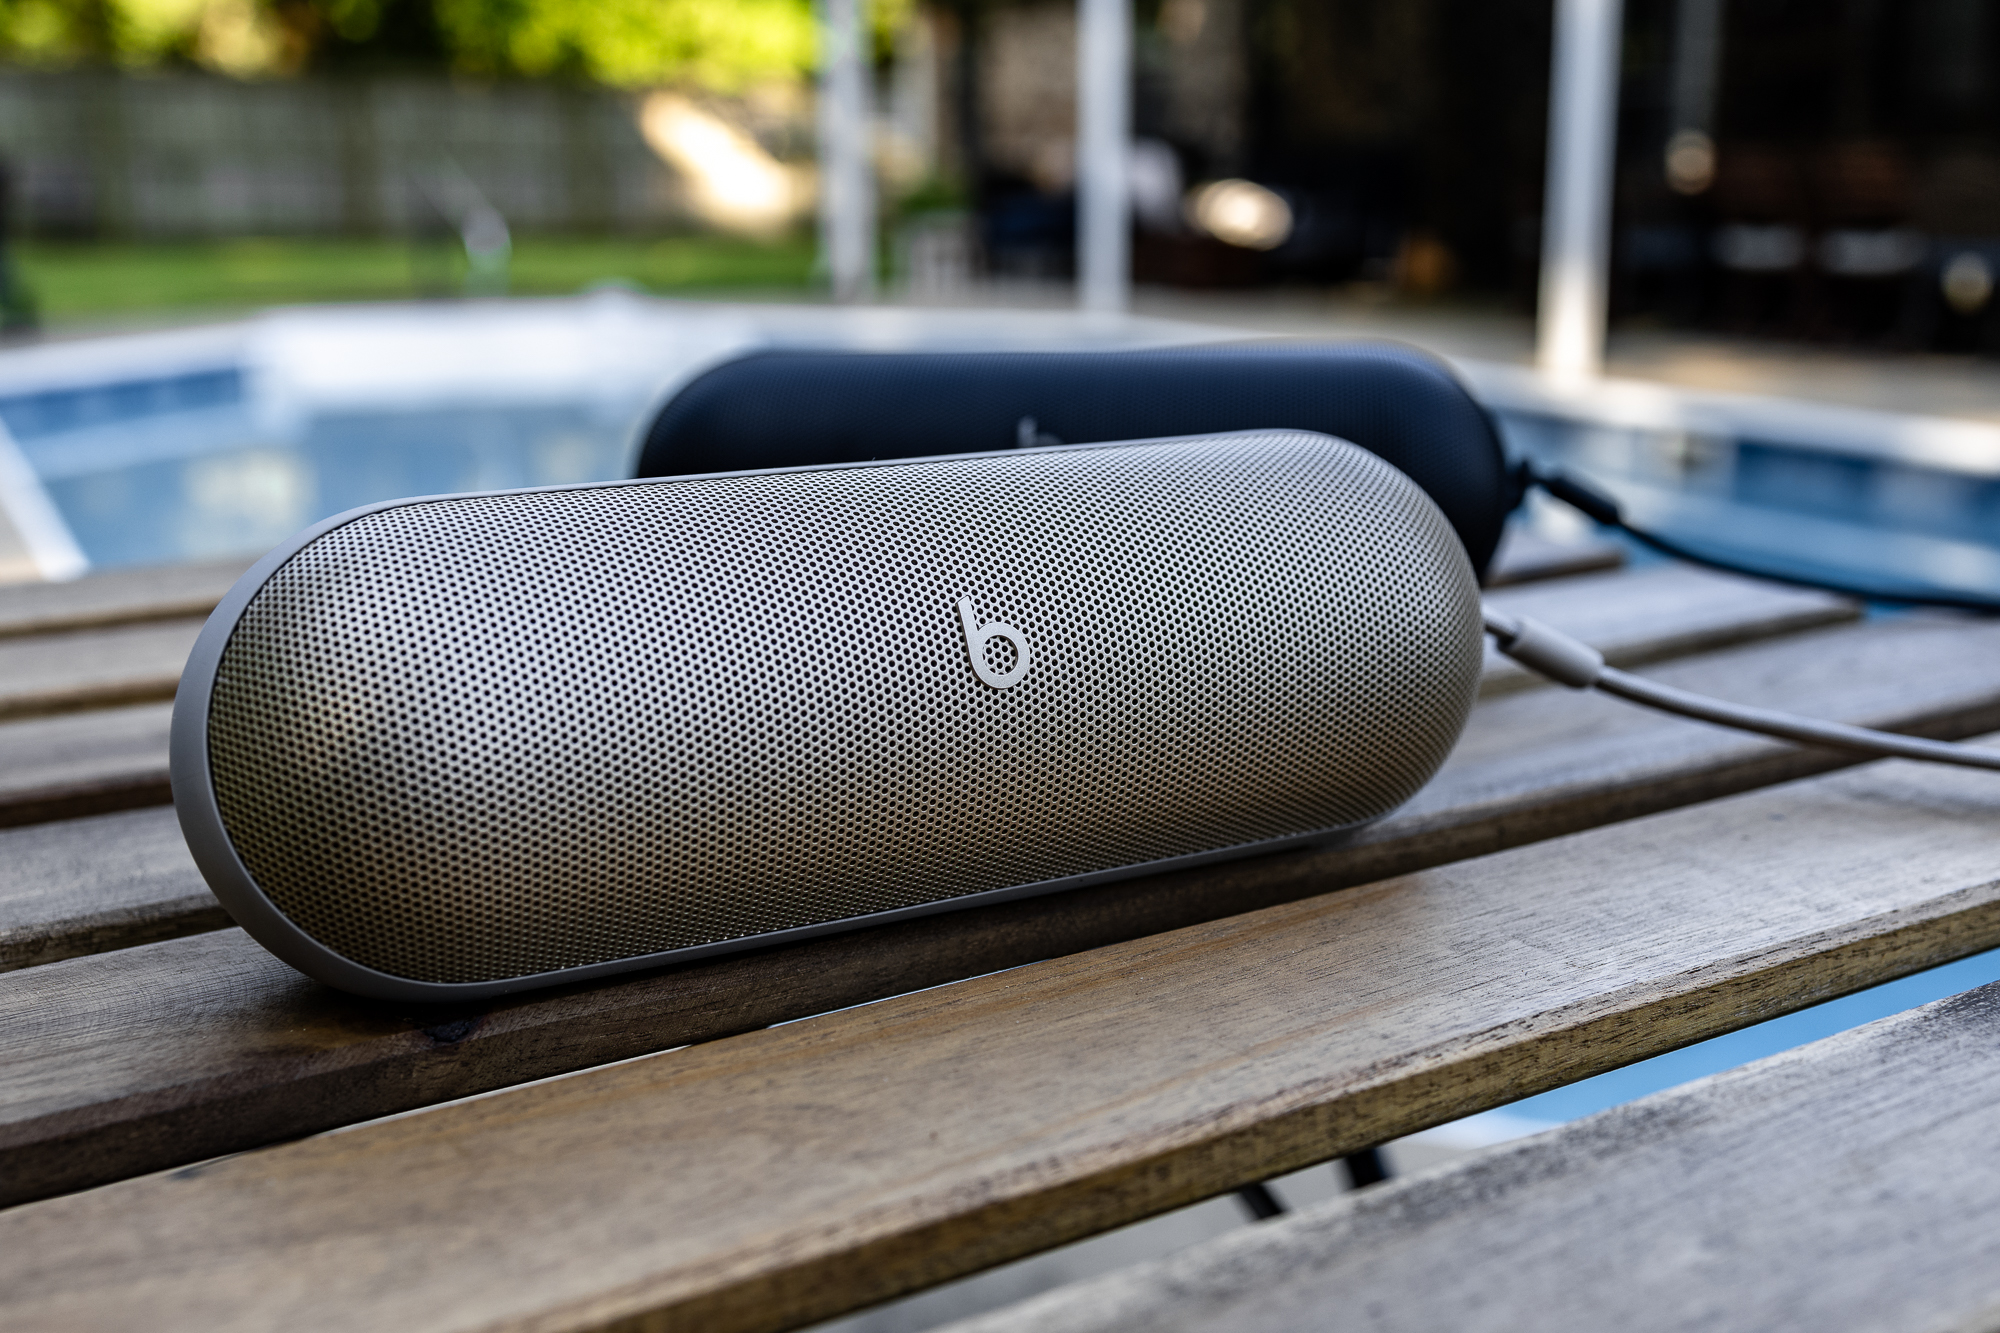 The 2024 model of Beats Pill Bluetooth speaker on a table near a pool.